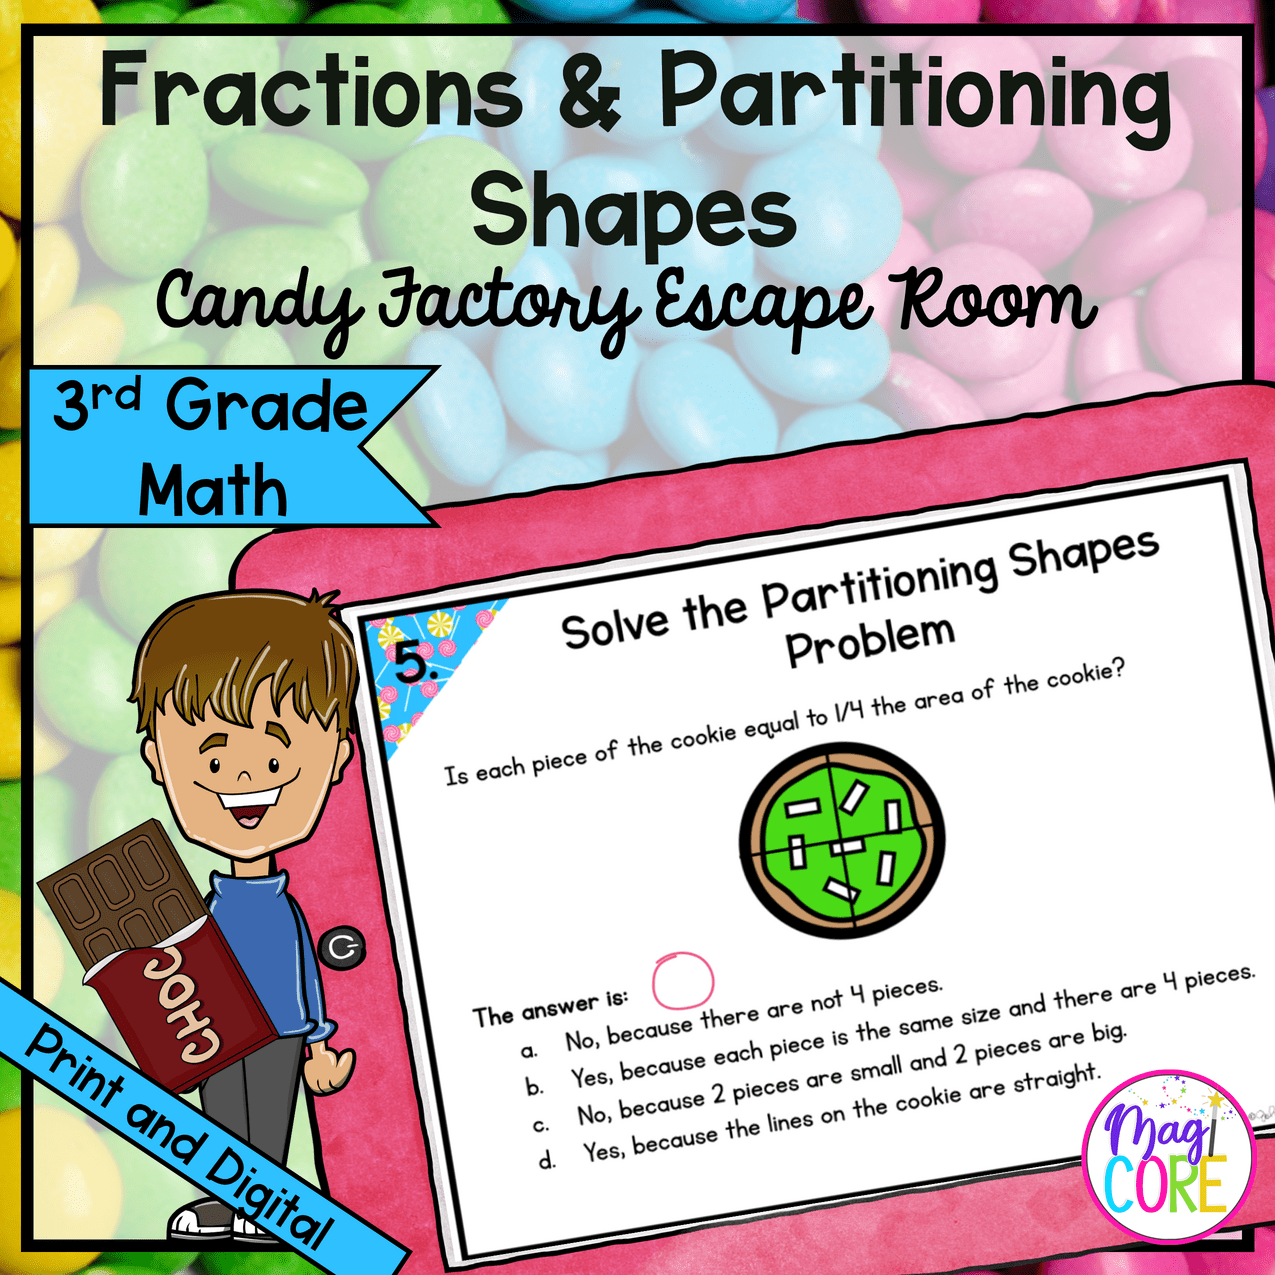 Fractions & Partitioning Shapes - 3rd Grade Candy Escape Room - Digital & Print